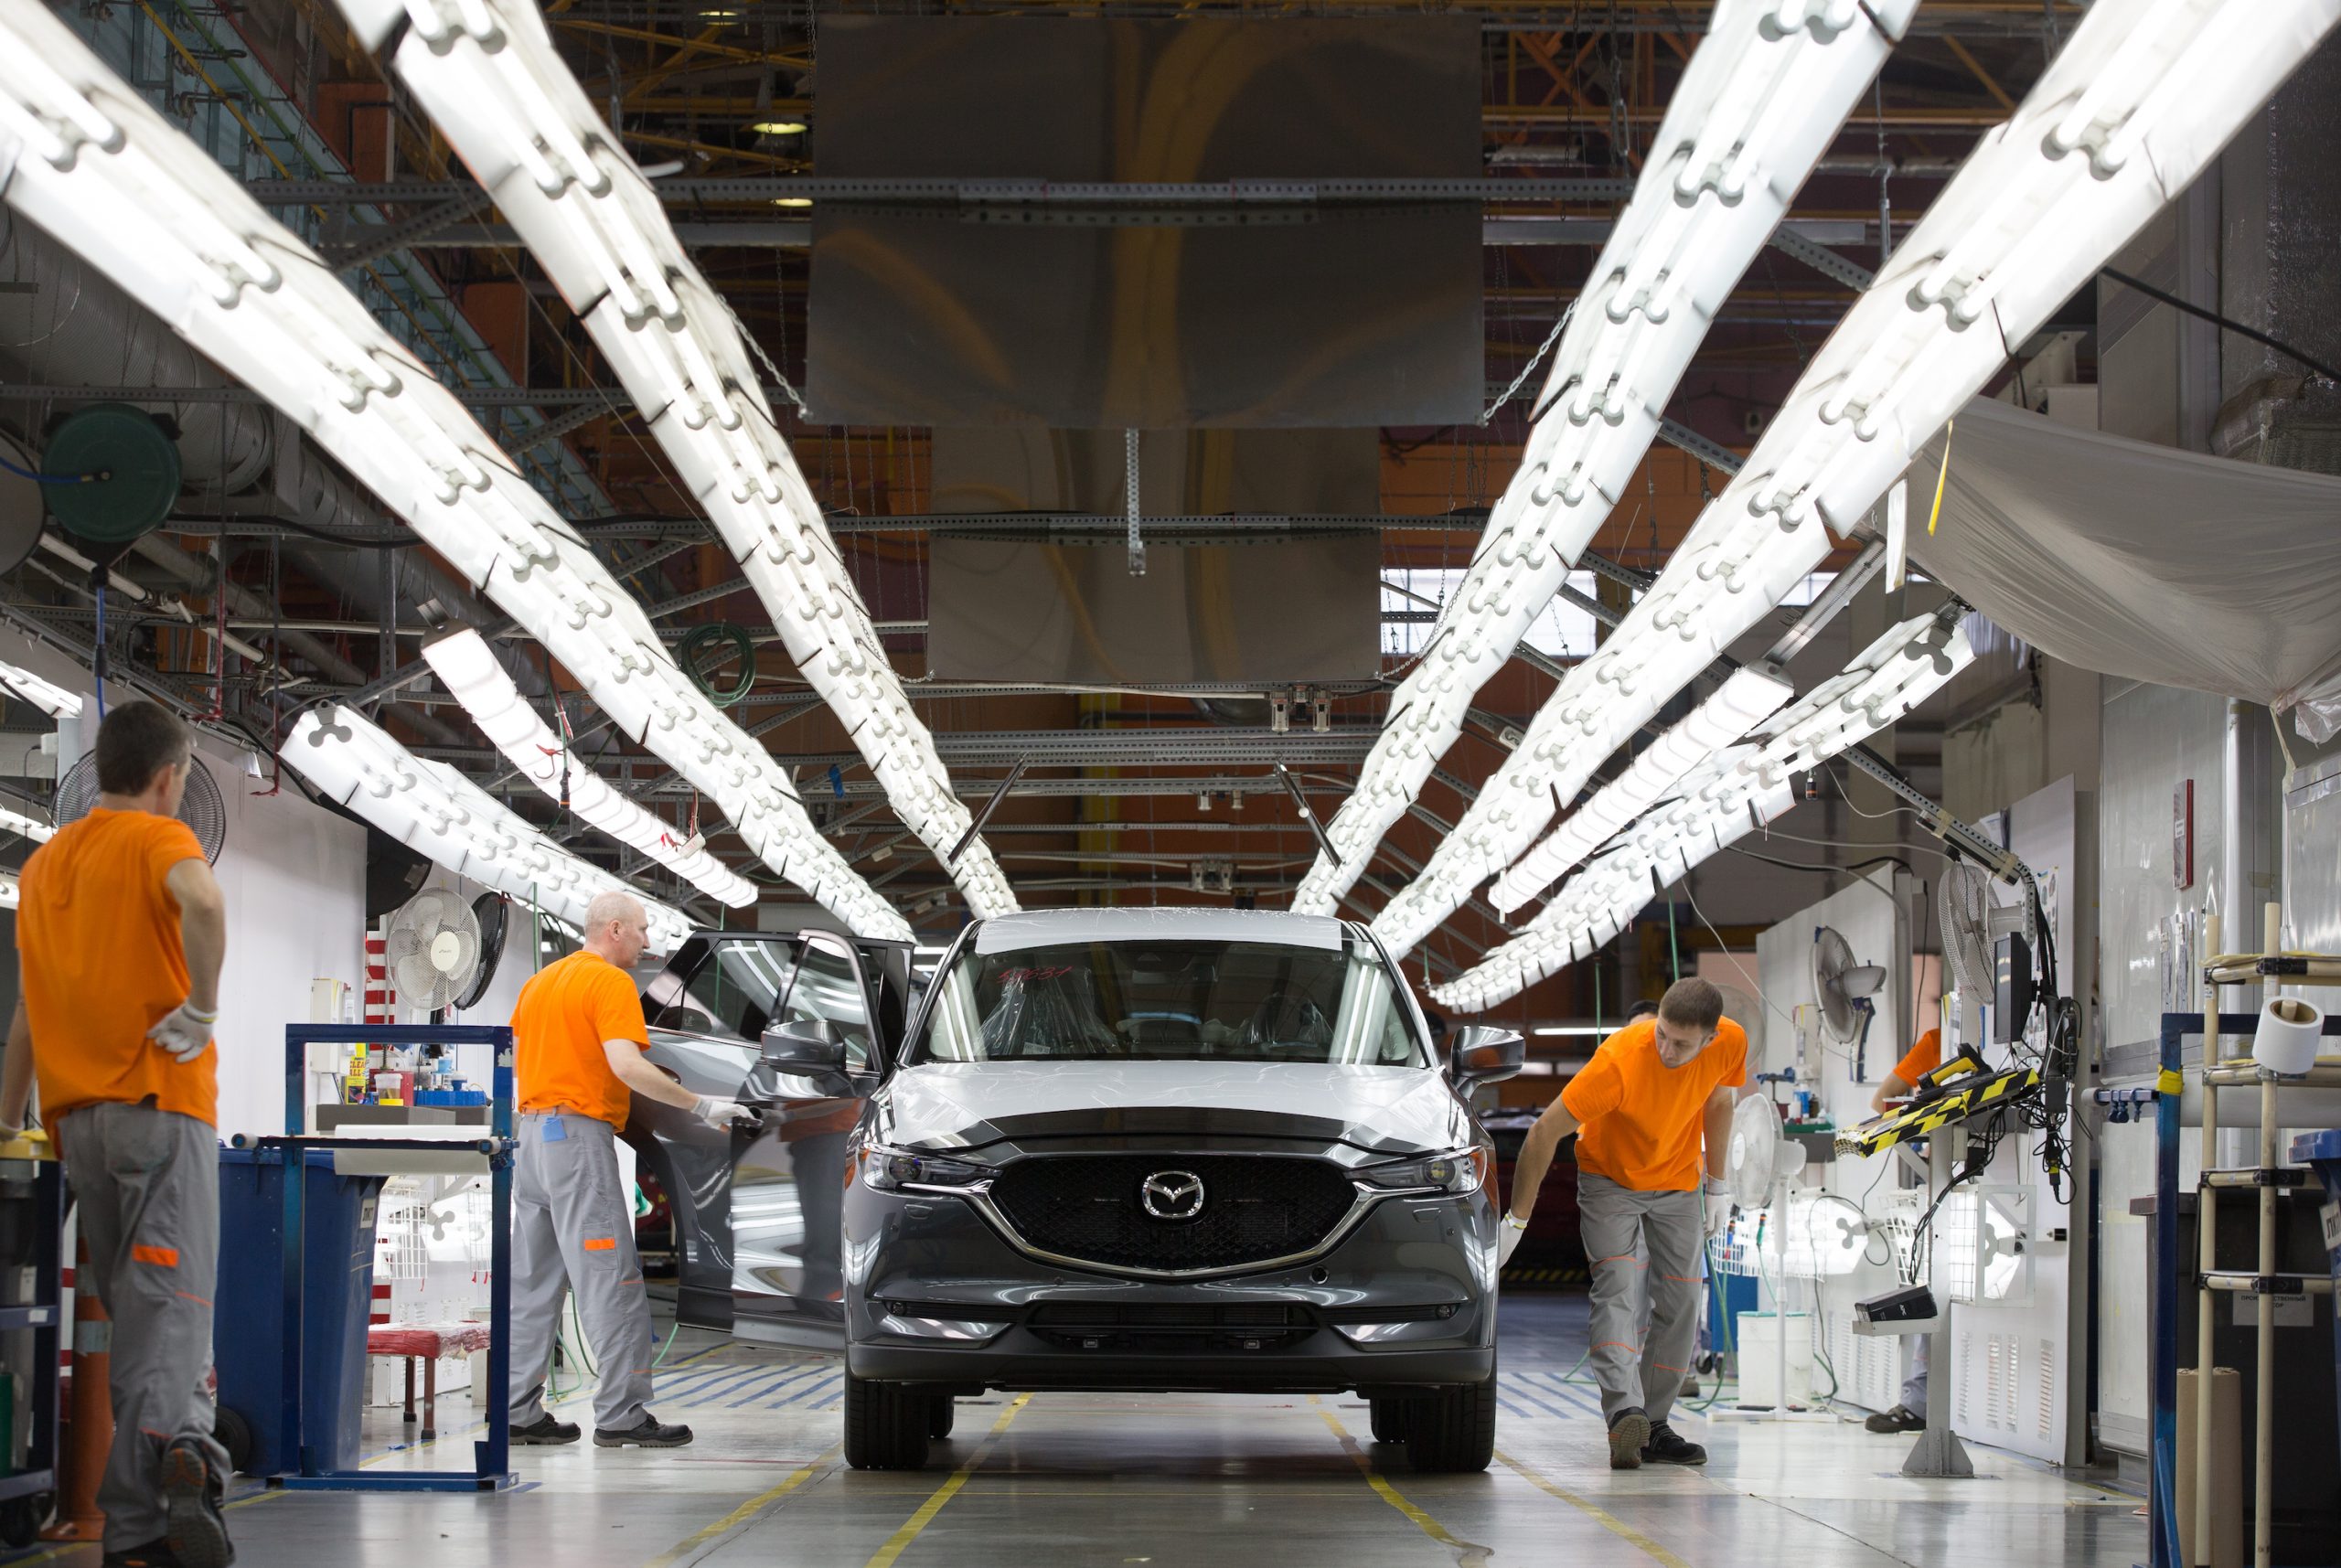 Workers check a Mazda Motor Corp. CX-5 sports utility vehicle (SUV) under inspection lights on the assembly line